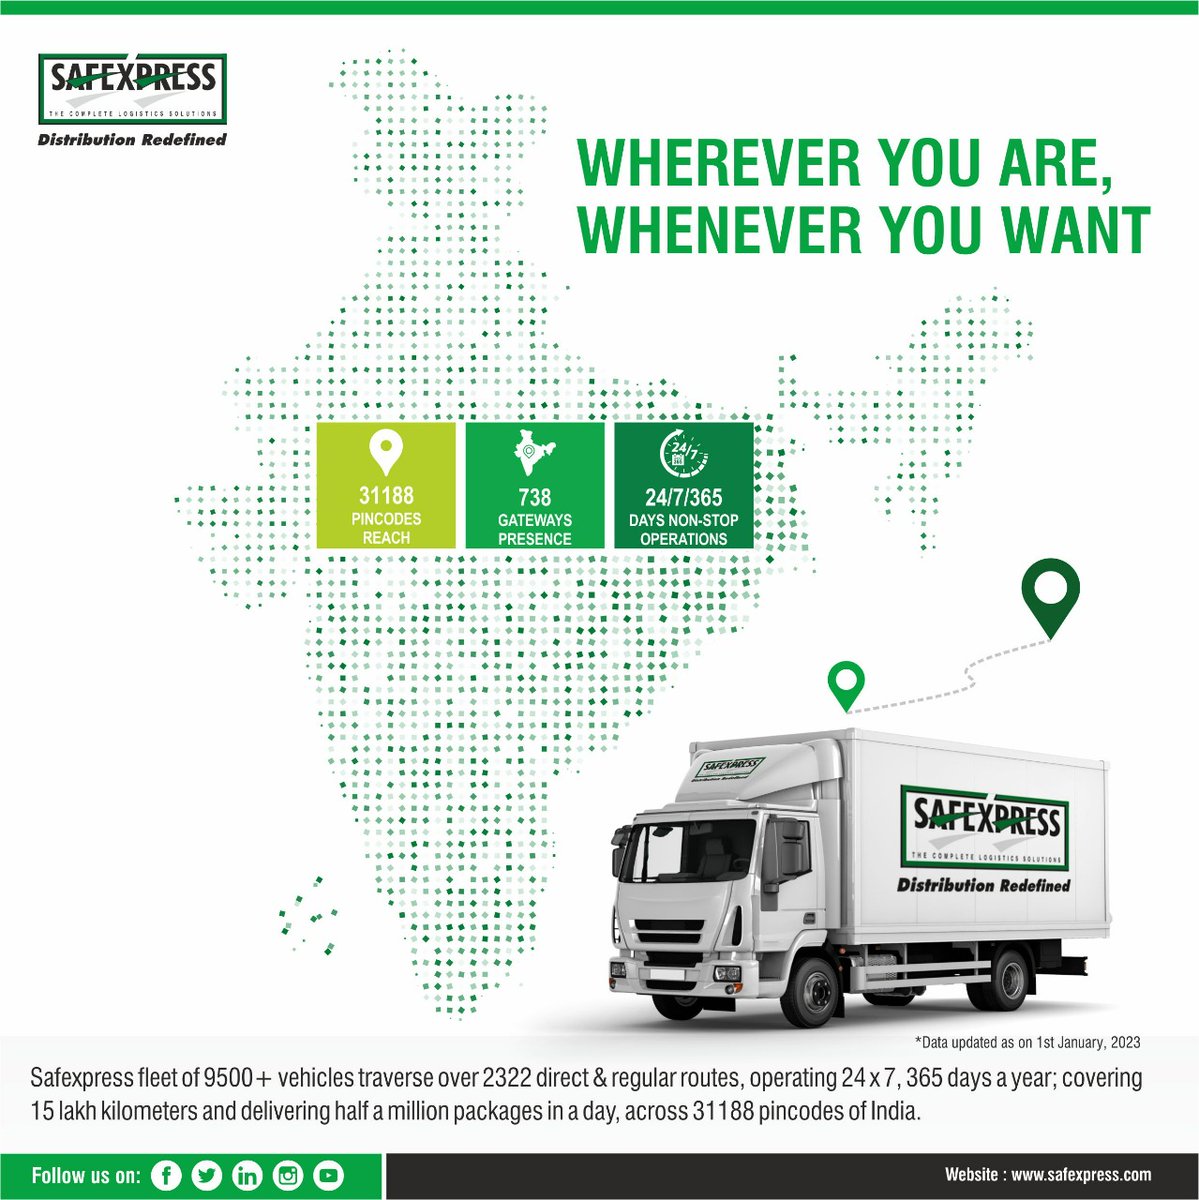 #WhereverYouAreWheneverYouWant

Our commitment towards our customers is as big as our network! 

#Safexpress #reach #network #expressdelivery